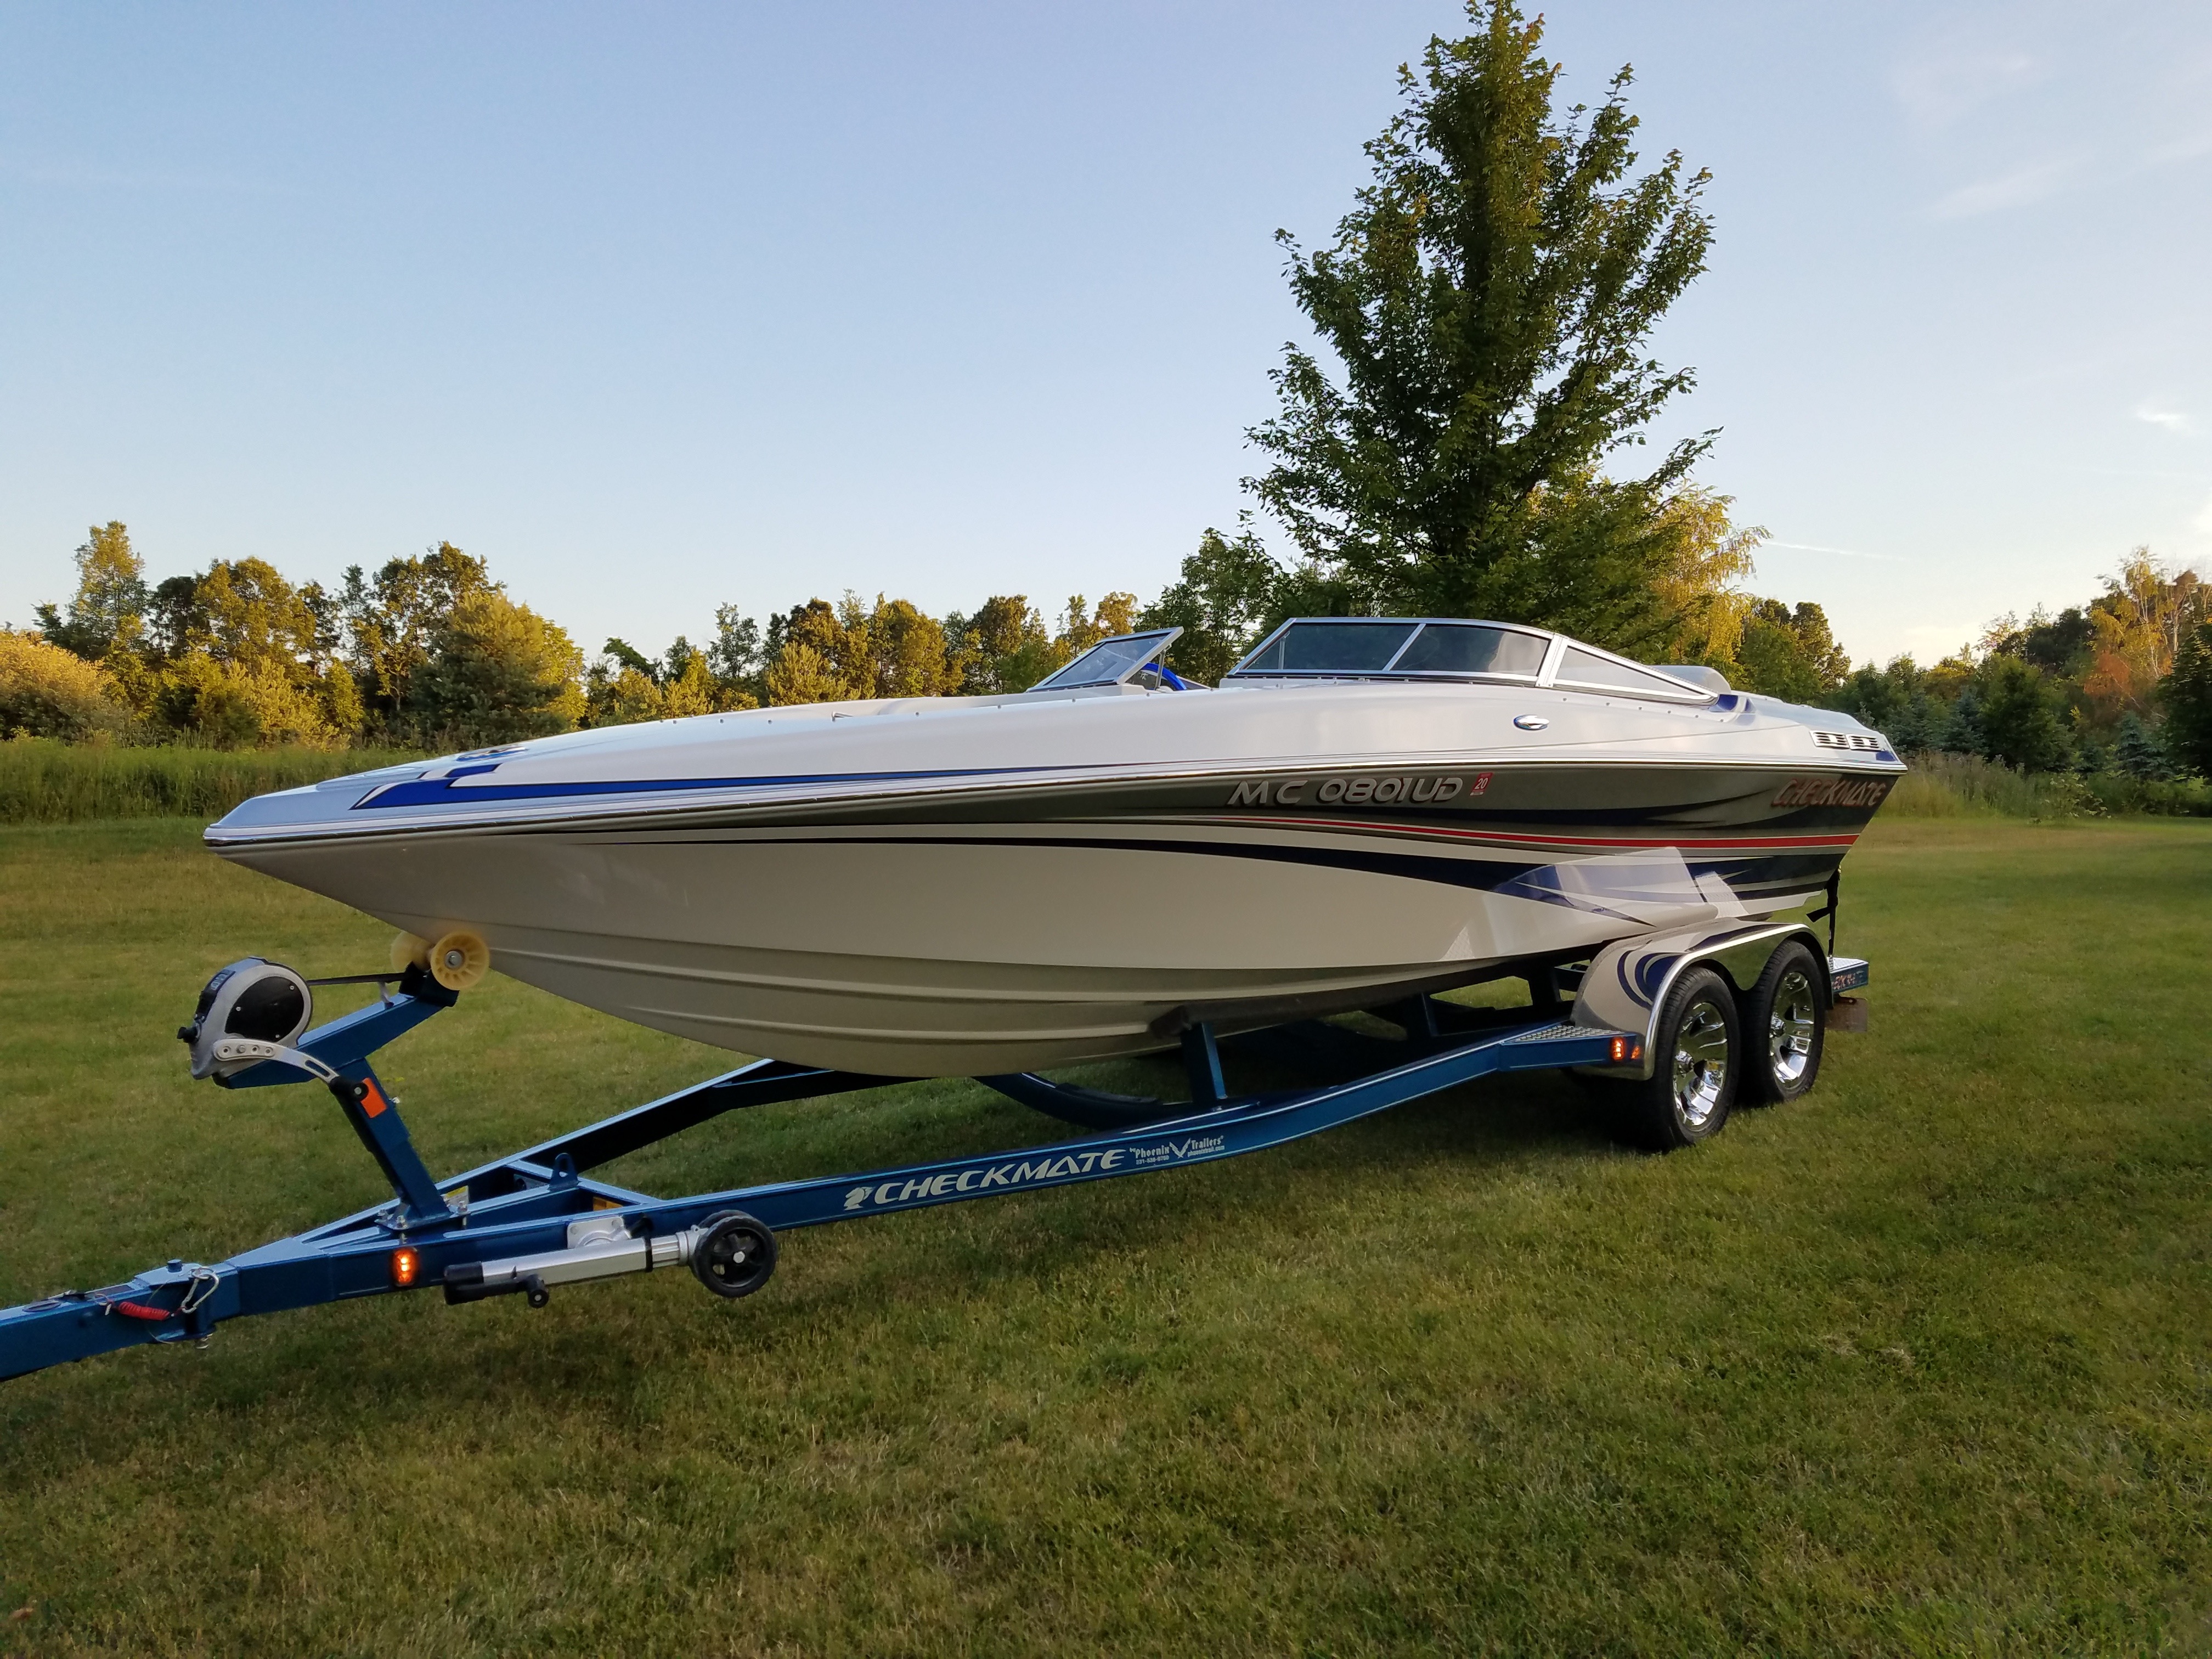 Boats for sale in Michigan - boats.com